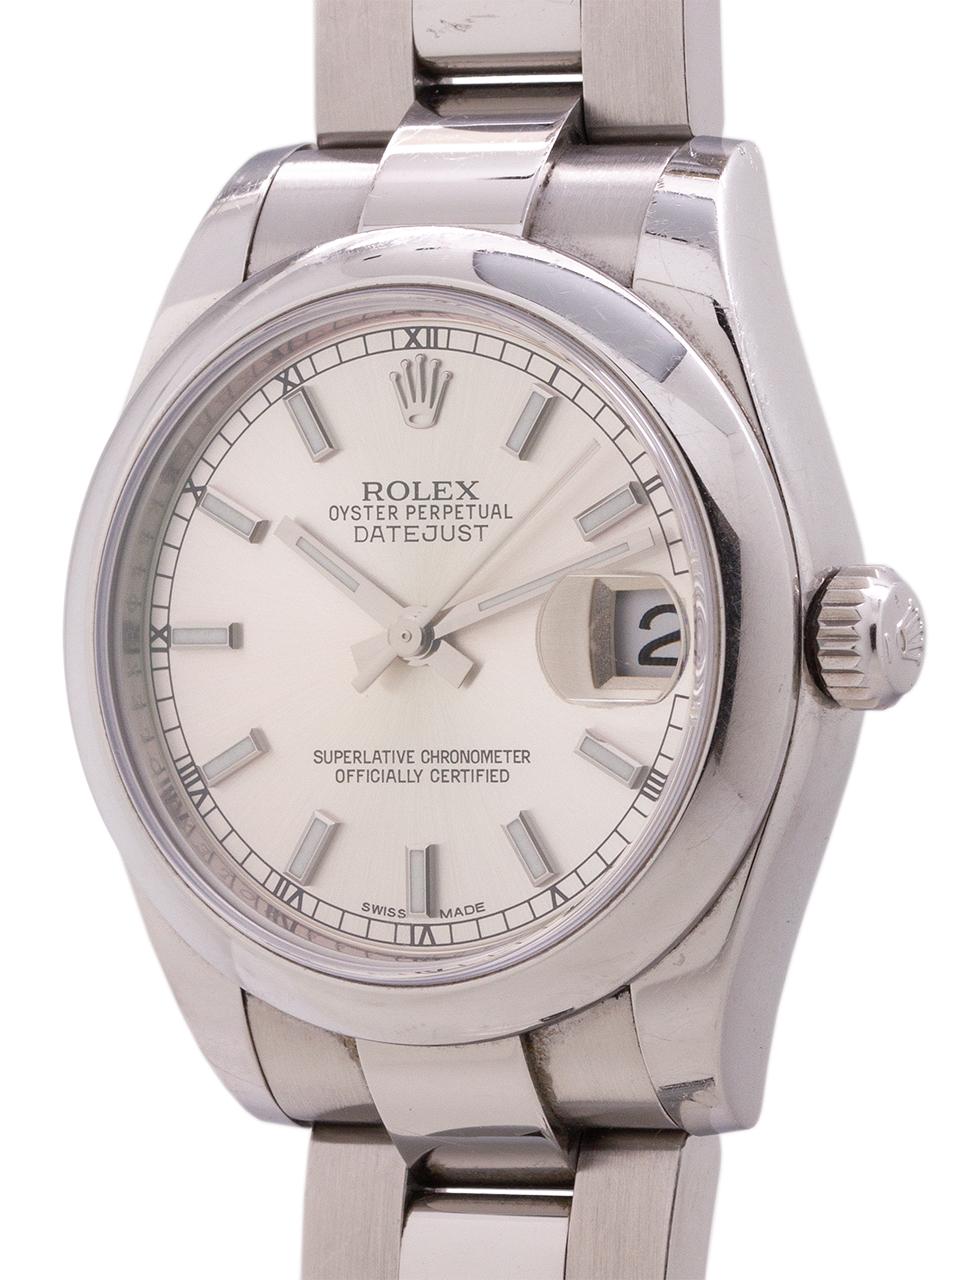 
Man/s midsize Rolex stainless steel Datejust ref# 178240 circa 2015 complete with box and papers. Featuring  31mm diameter midsize case with smooth domed bezel and sapphire crystal, original silver dial with new style wide luminous stick indexes.